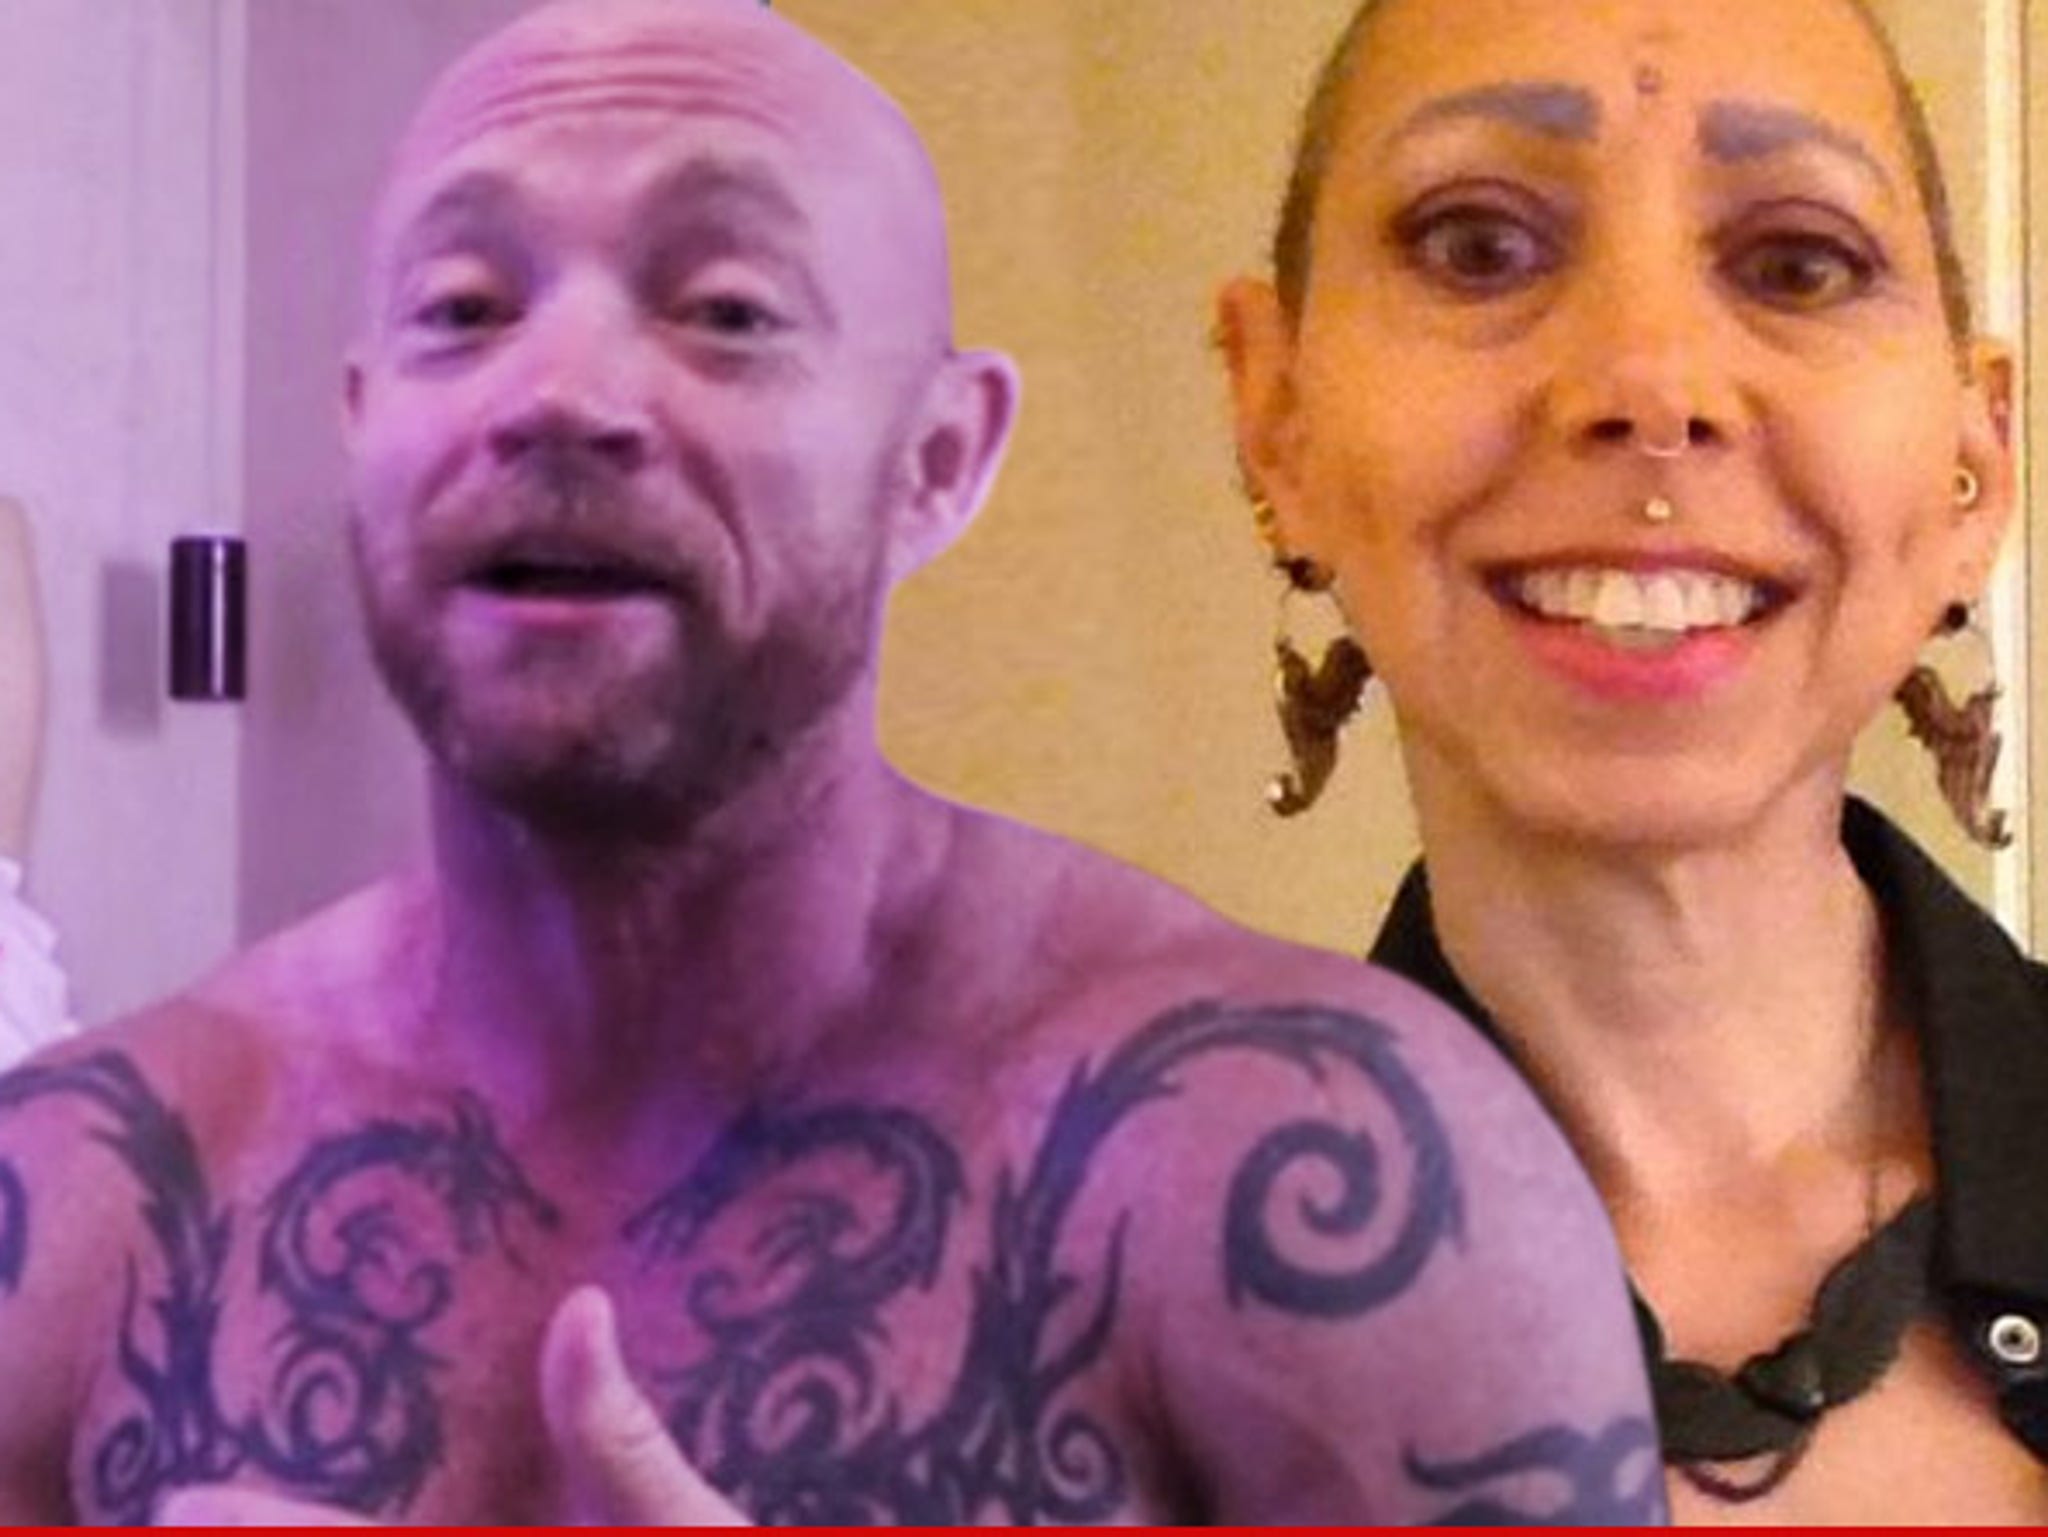 Lindsey Shaw Shemale Porn - Buck Angel Divorce Battle -- Transsexual Porn Star Involved in Bitter Fight